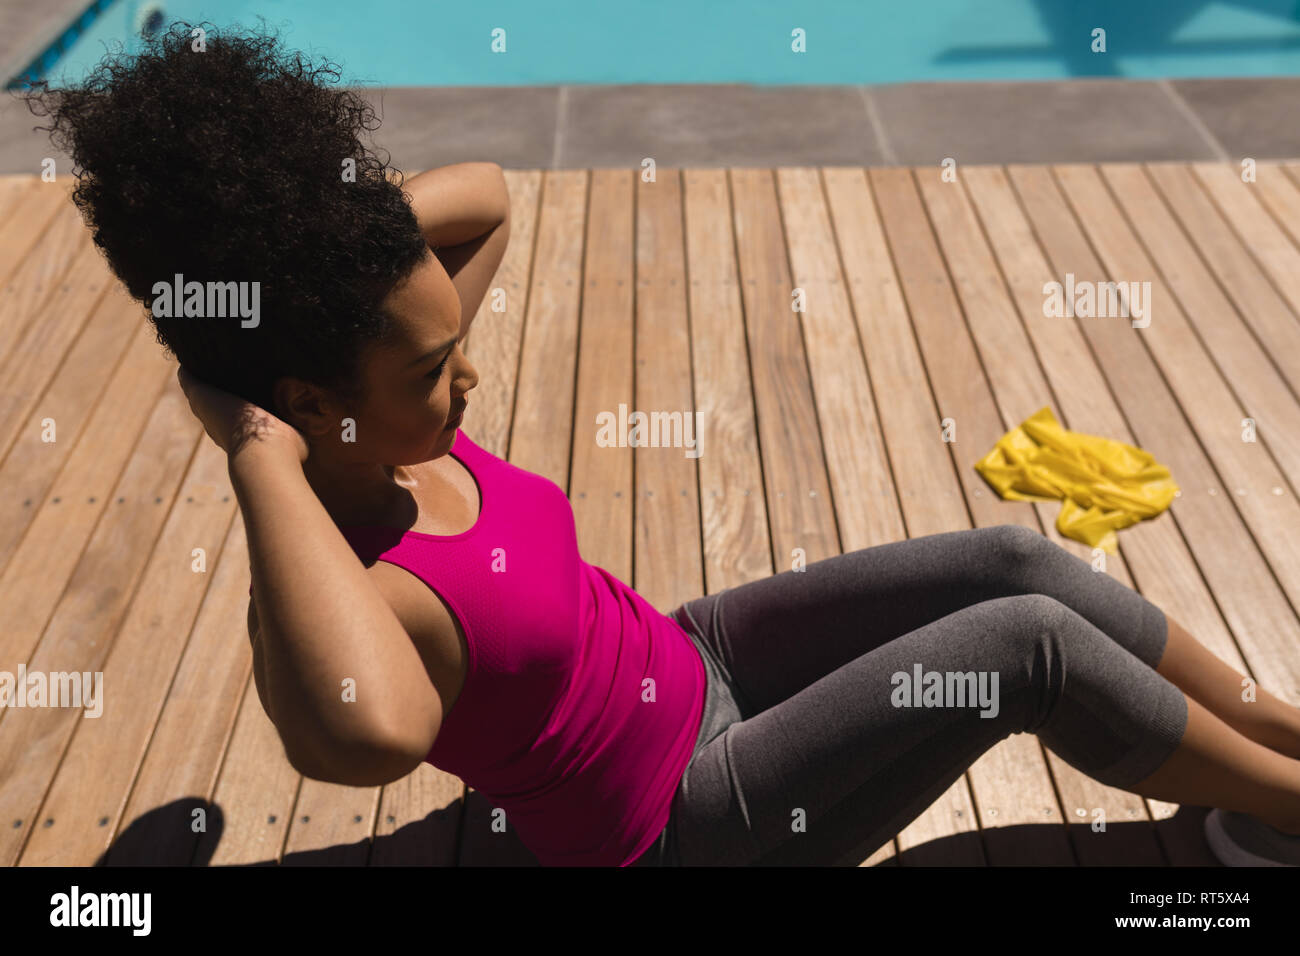 Woman performing crunch exercise in the backyard of home Stock Photo